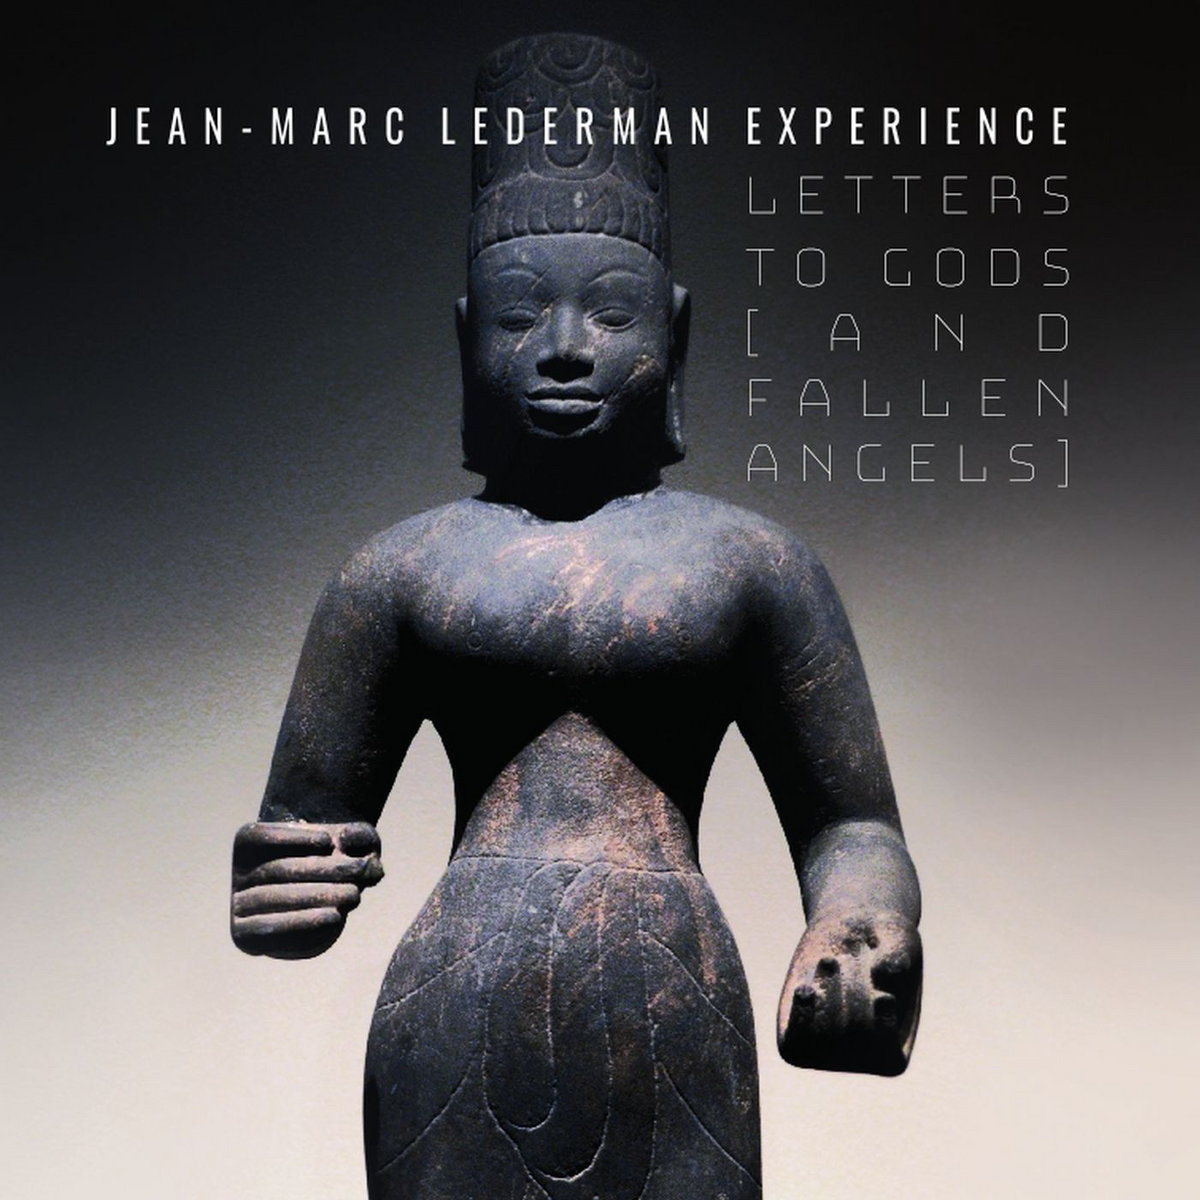 News – Jean-Marc Lederman Experience – Letters To Gods (and fallen angels)